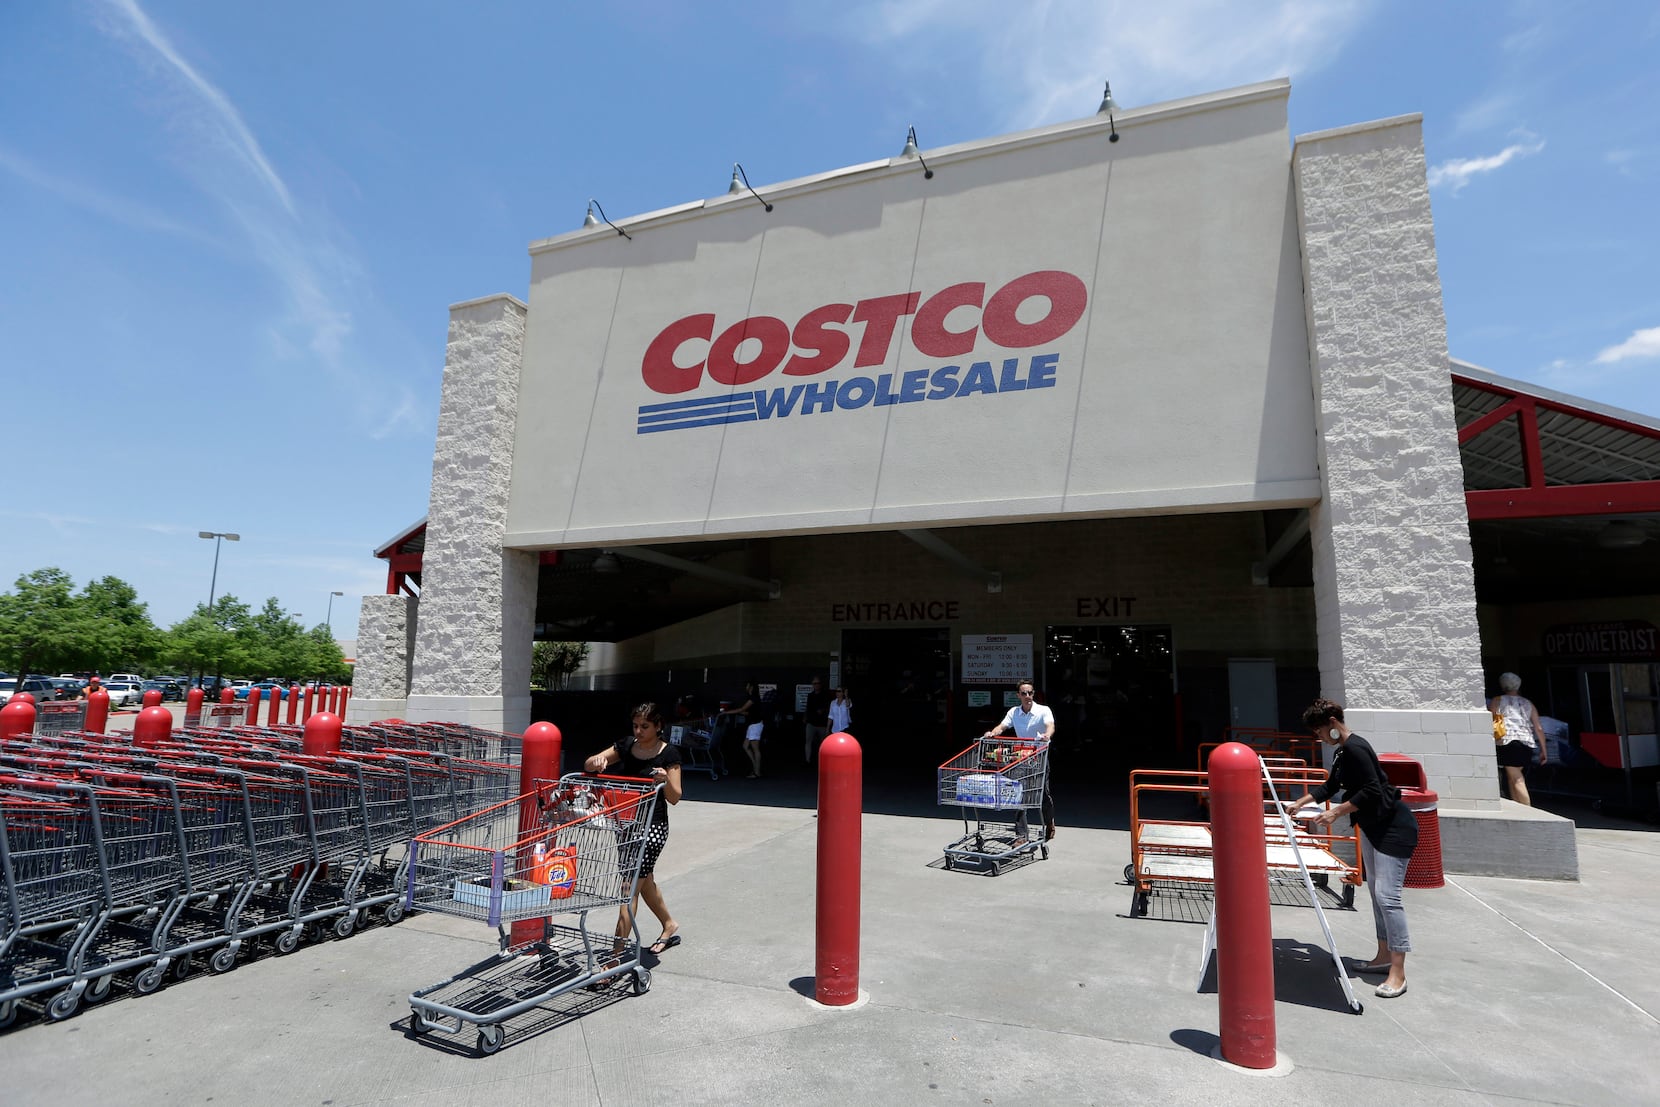 Costco stakes out a new location in fast-growing Prosper